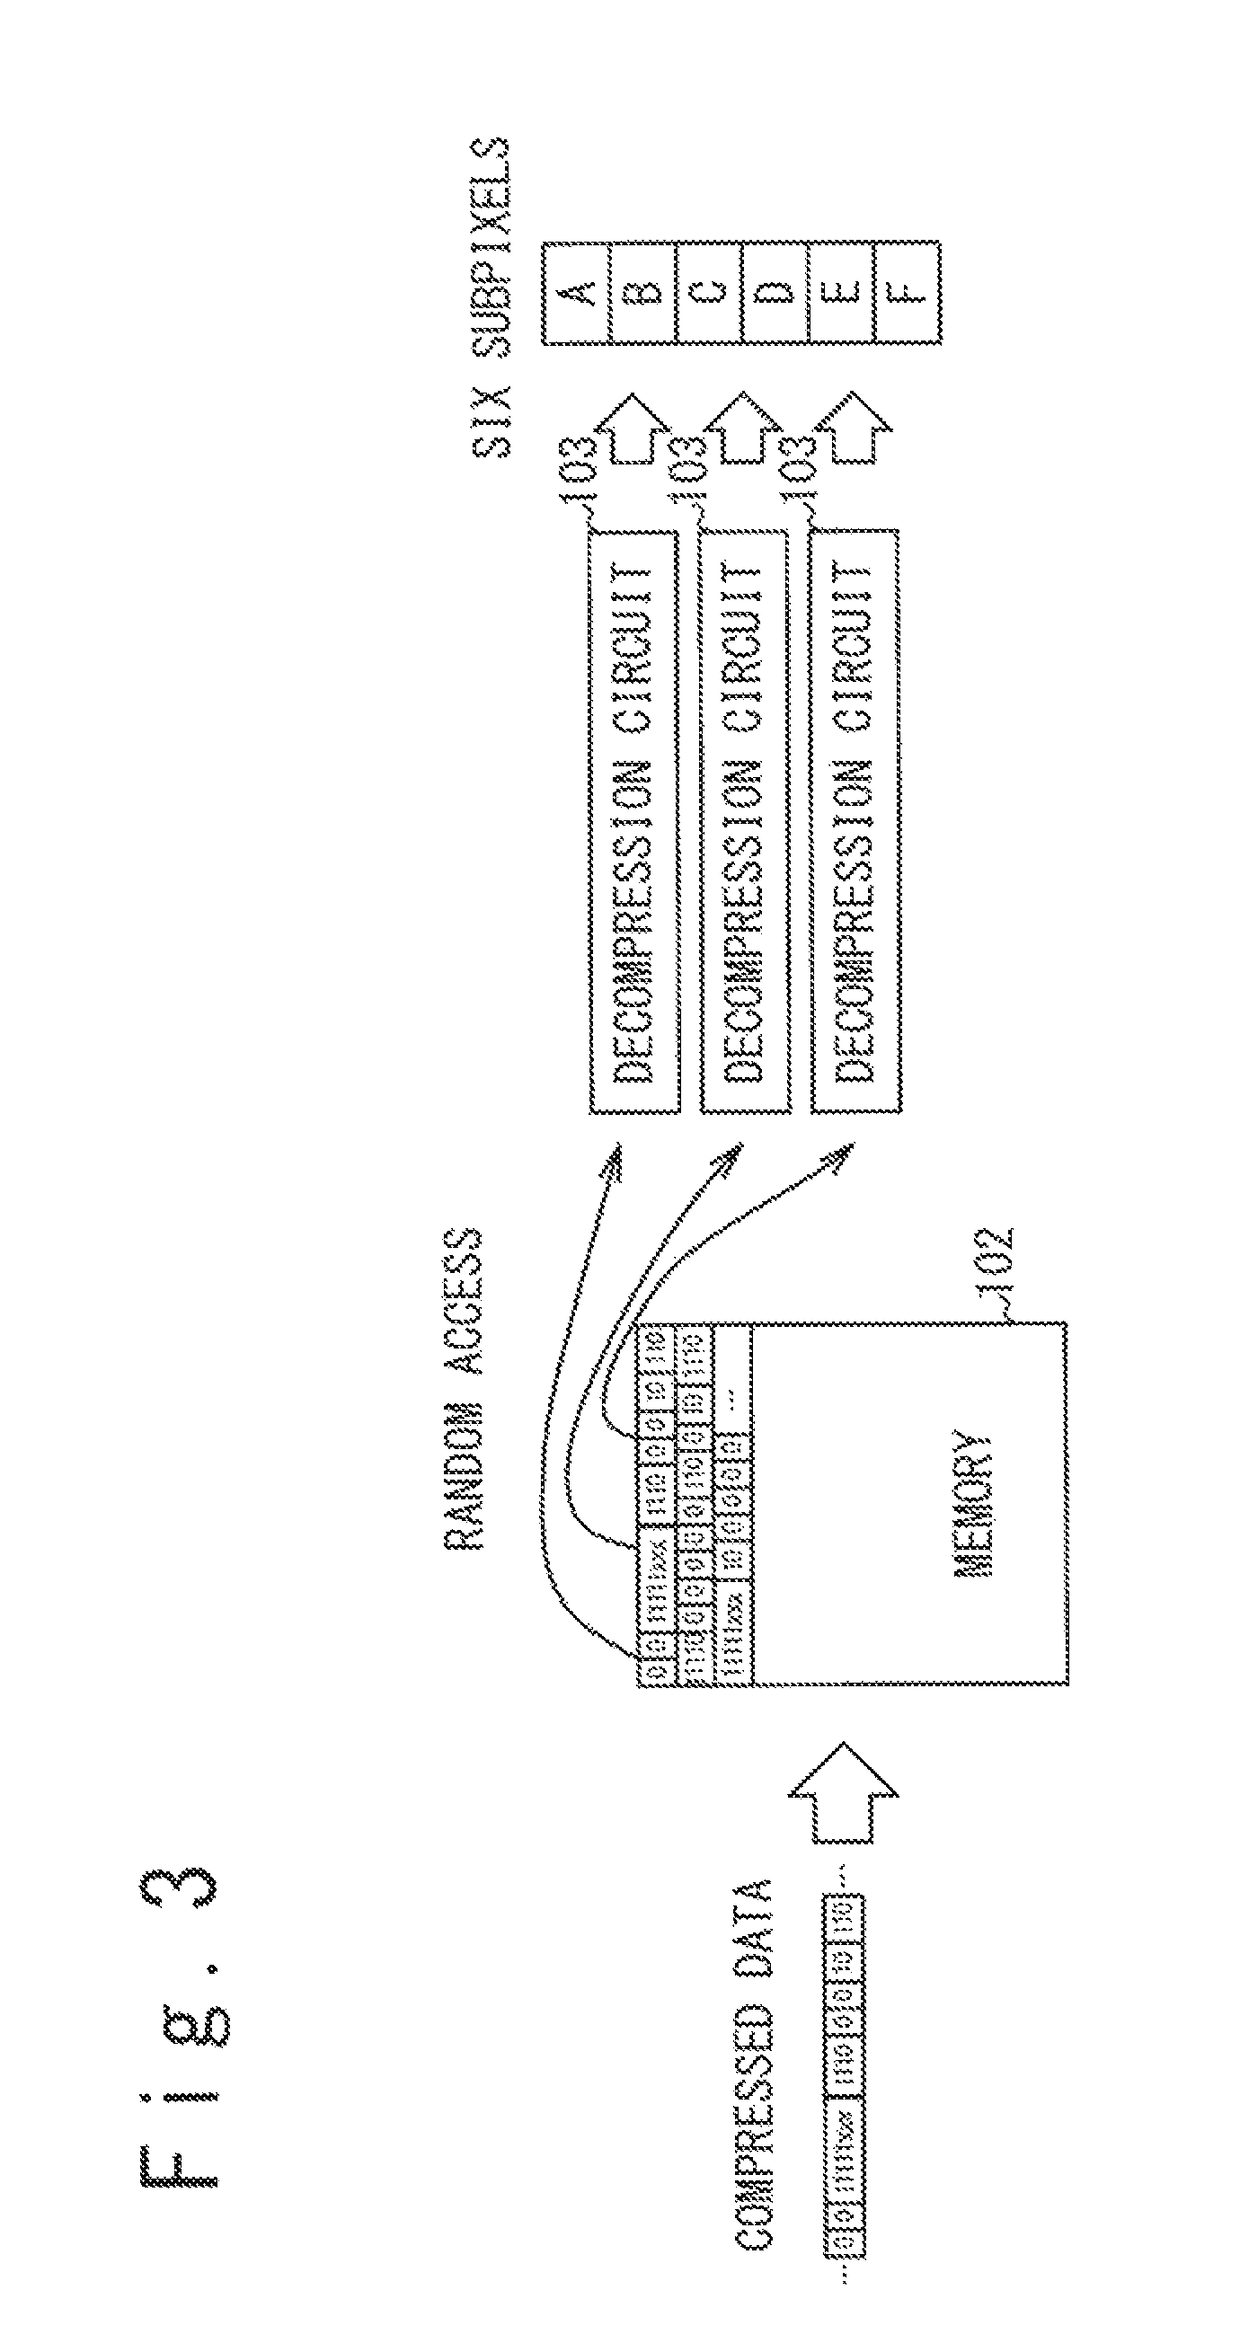 Compressed data transmission in panel display system